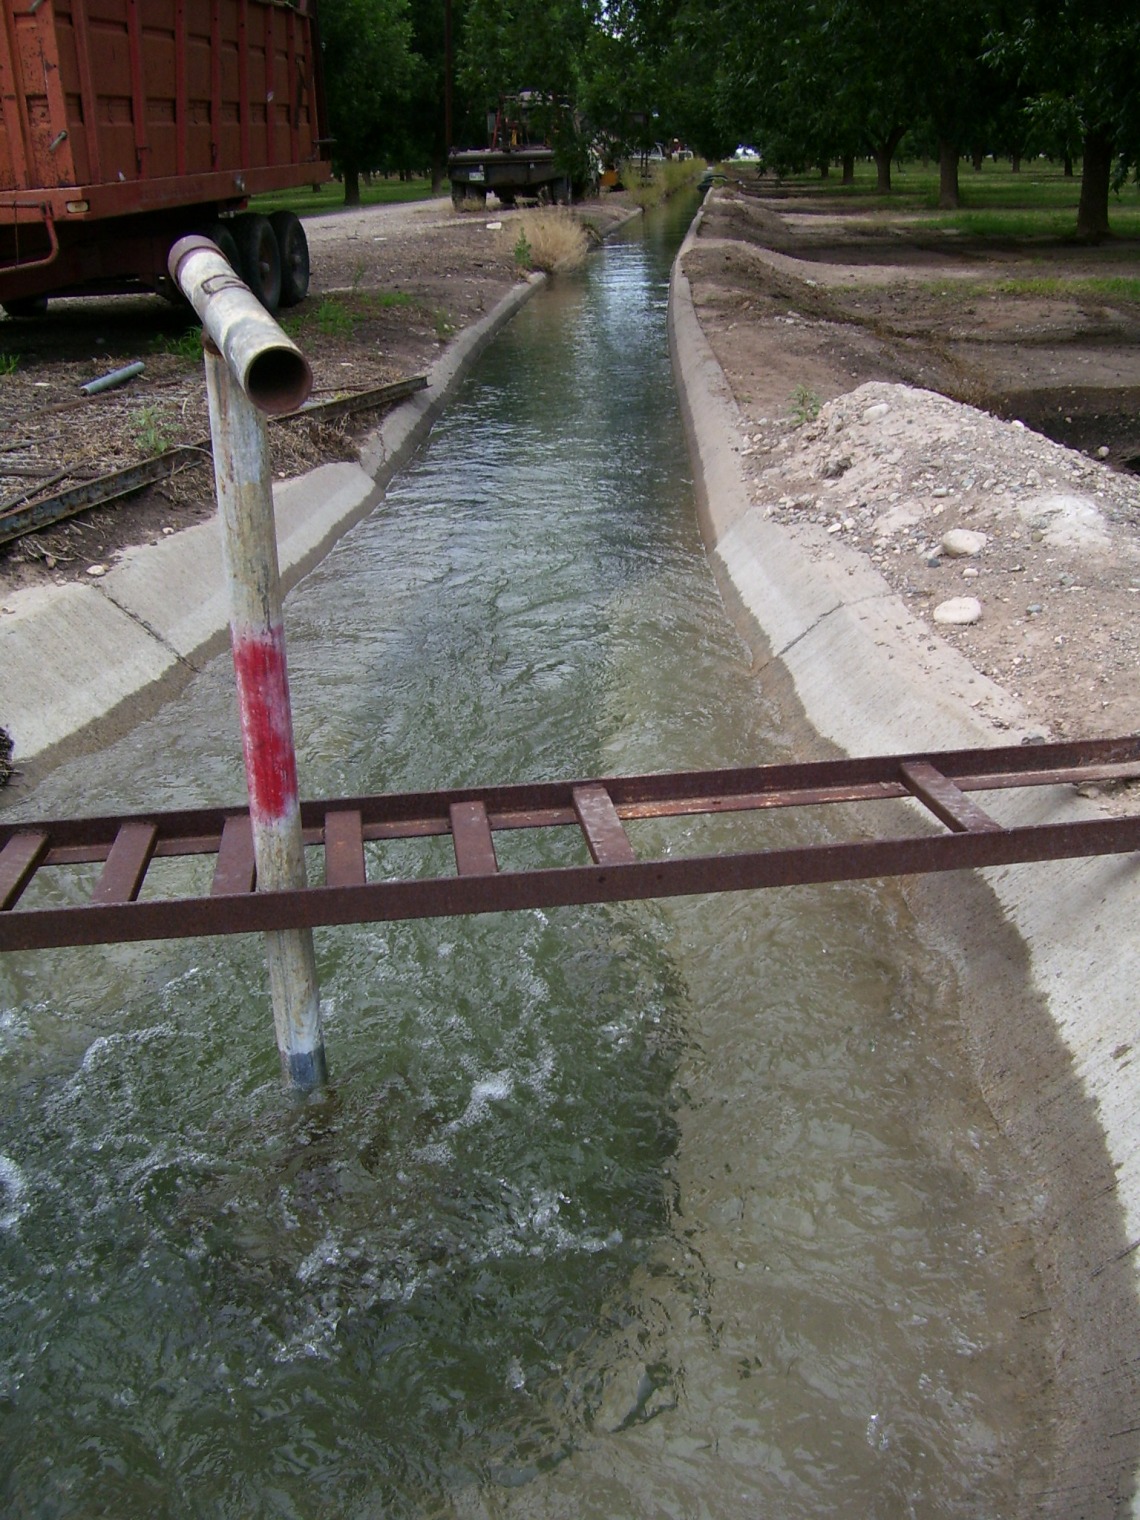 Relocating this agricultural infrastructure, such as irrigation conveyance systems, may be costly, especially if climate change occurs quickly.